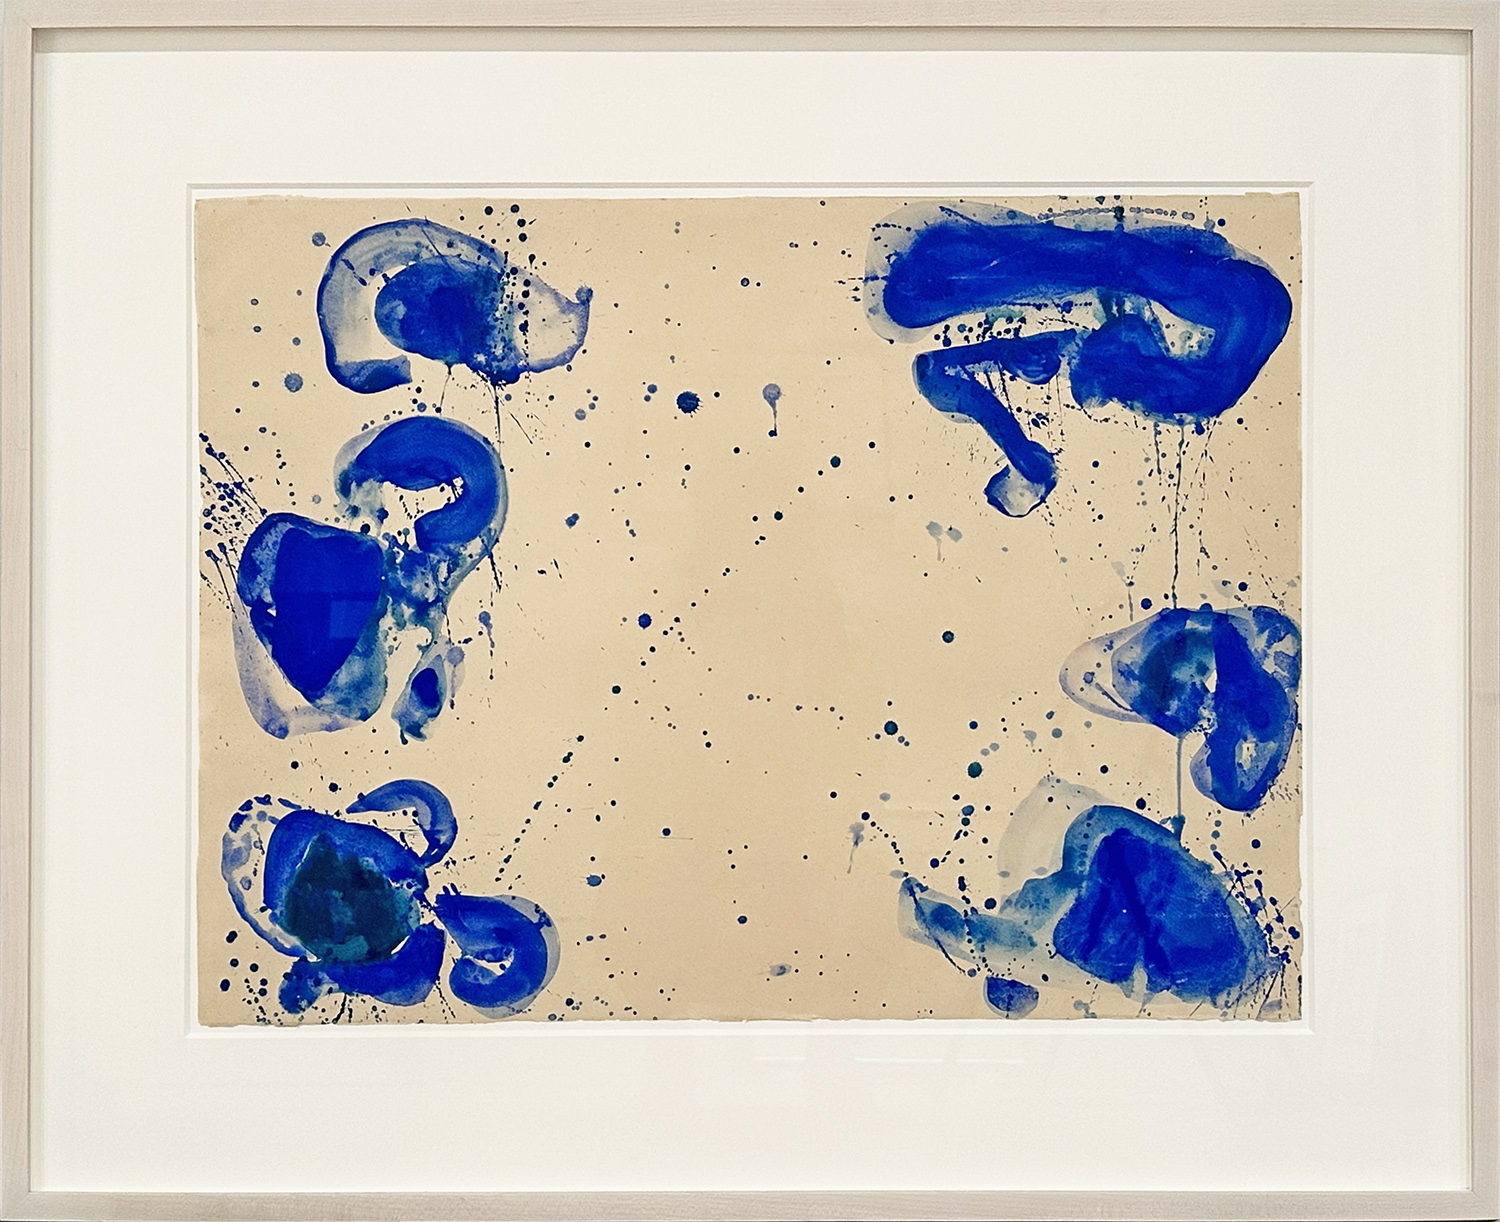 Sam Francis blue balls abstract painting on paper